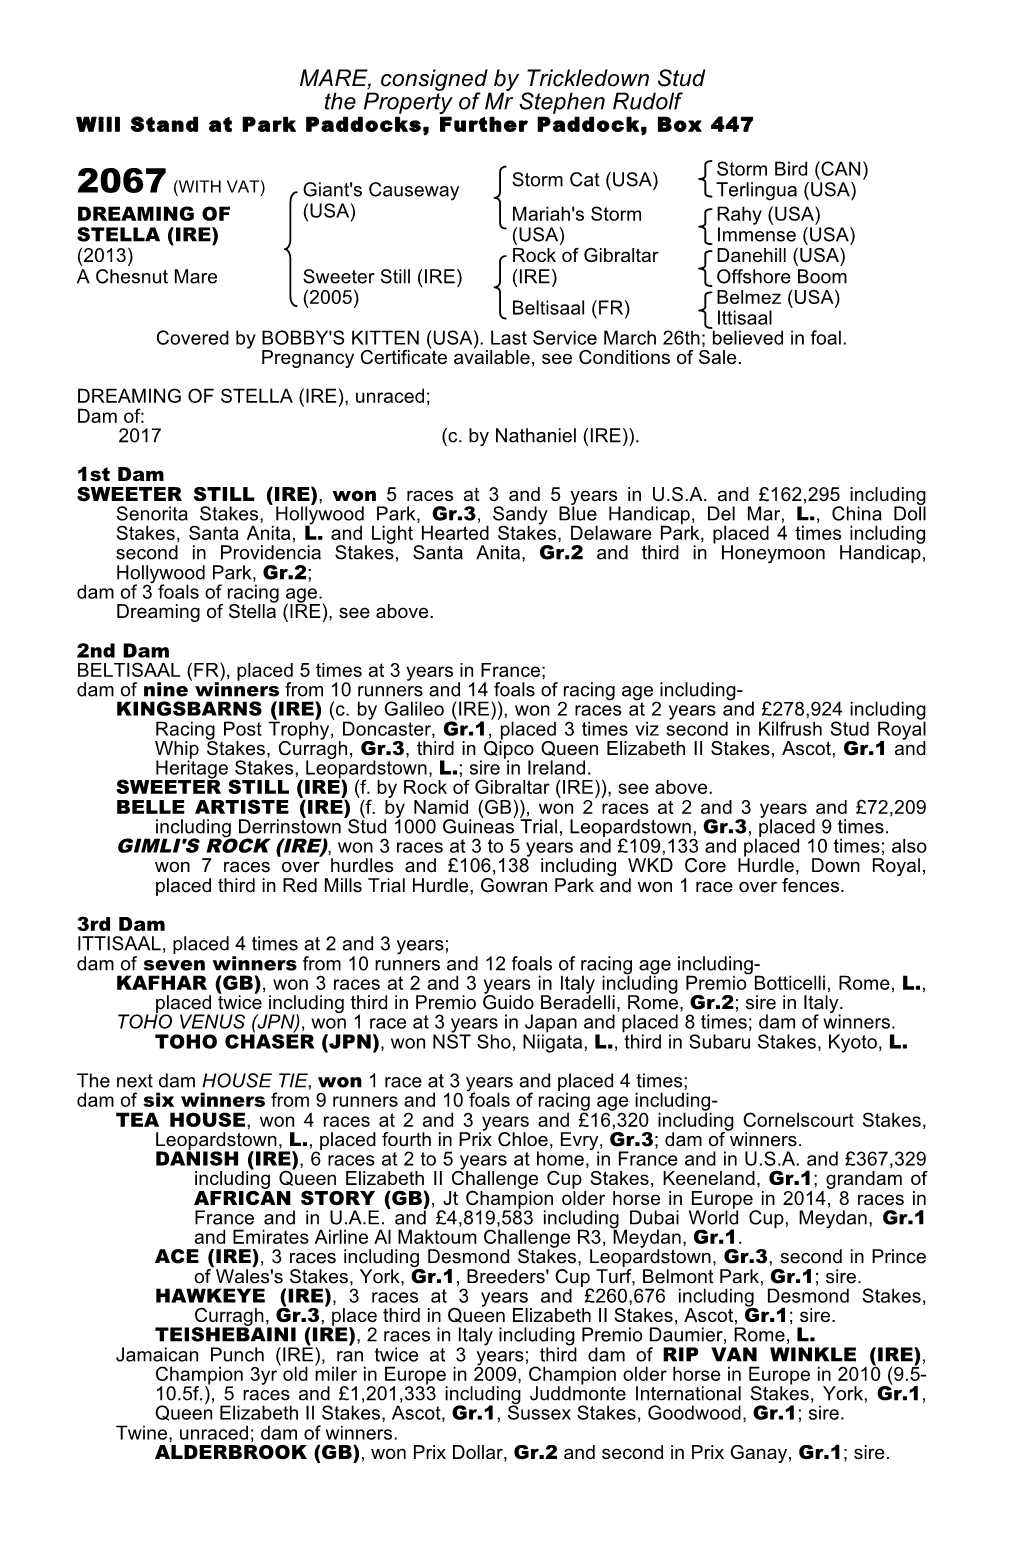 MARE, Consigned by Trickledown Stud the Property of Mr Stephen Rudolf Will Stand at Park Paddocks, Further Paddock, Box 447